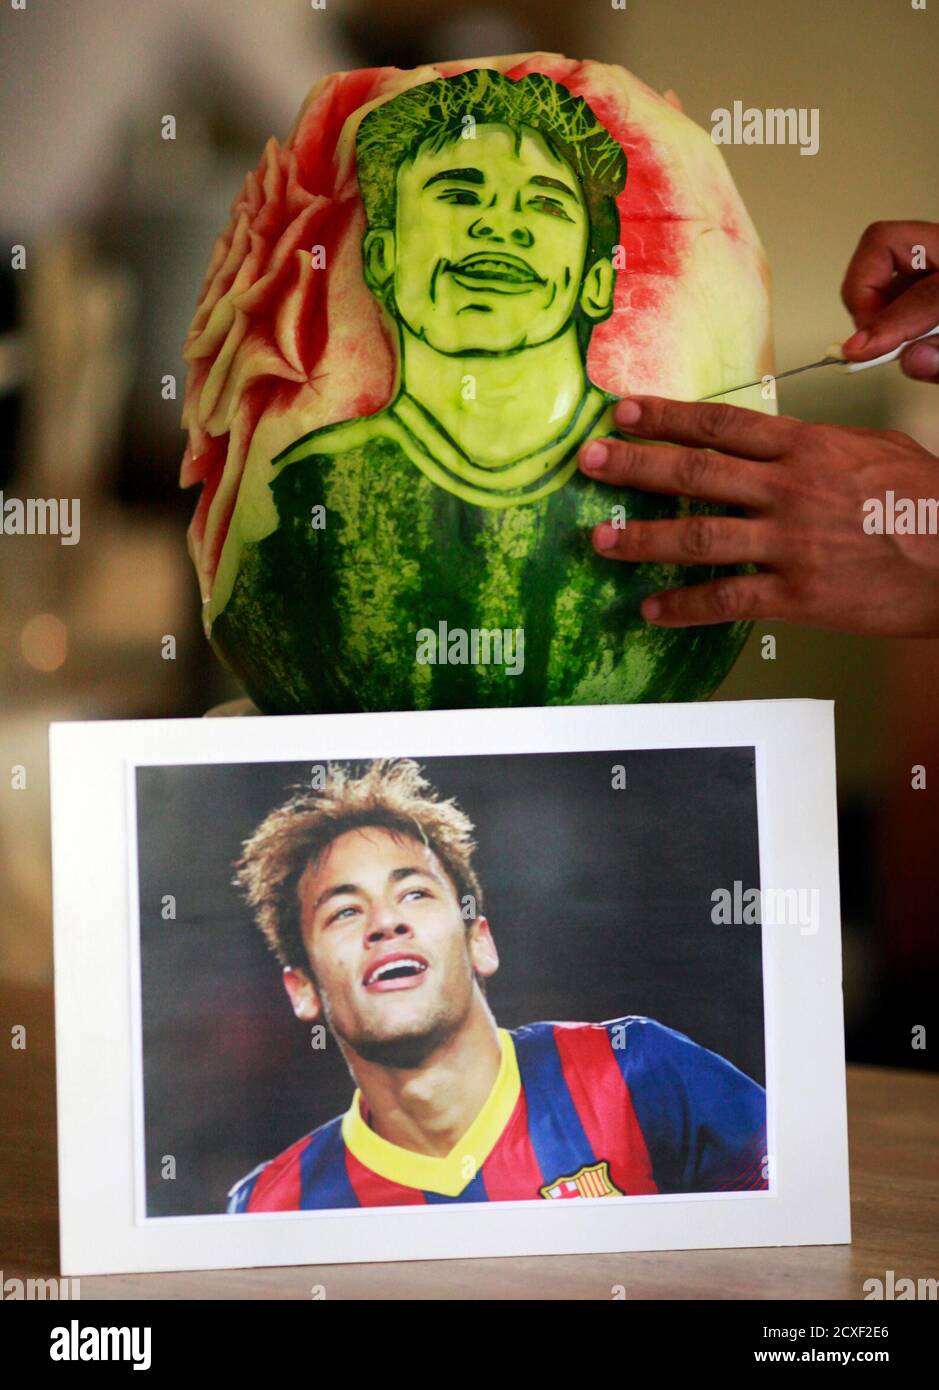 Chef Rogerio Holanda makes a carving of Brazil's soccer player Neymar in a watermelon at San Raphael hotel in Sao Paulo May 7, 2014. The 2014 World Cup will be held in Brazil from June 12 to July 13. REUTERS/Paulo Whitaker (BRAZIL - Tags: SPORT SOCCER WORLD CUP FOOD SOCIETY) Stock Photo